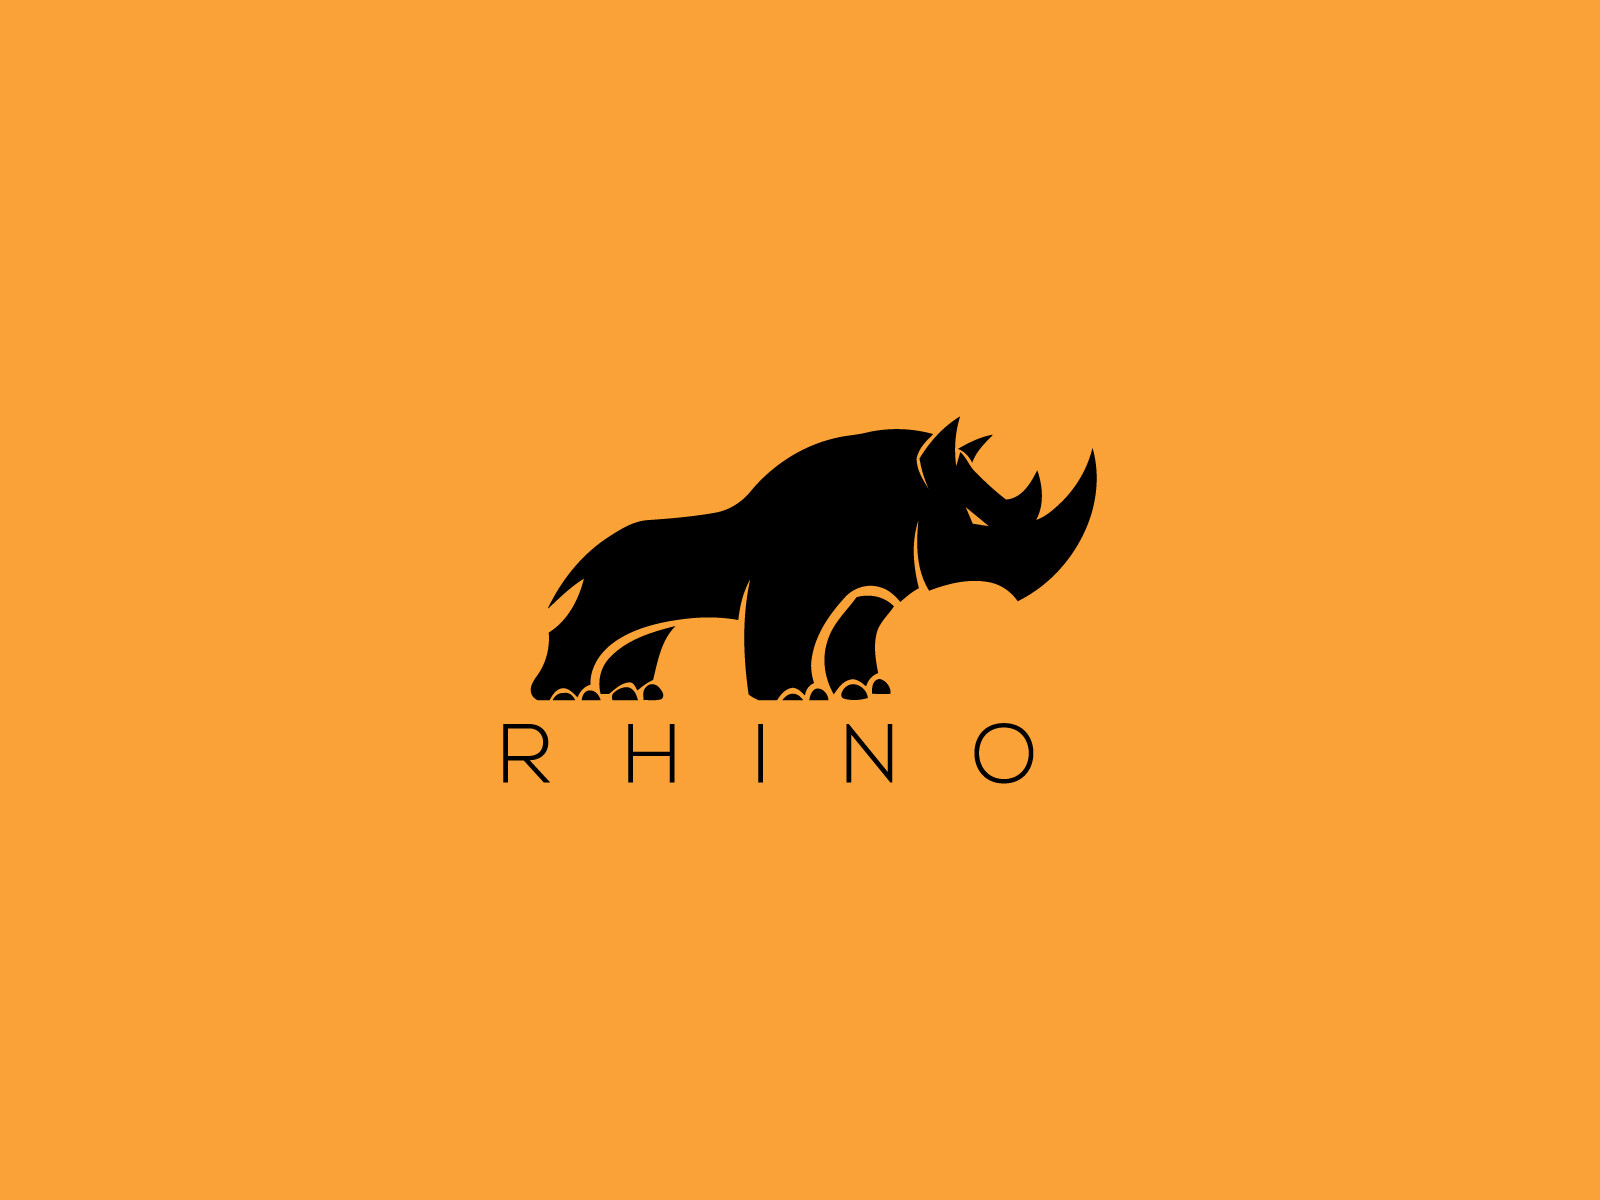 Anime Rhino Vector Images (over 10,000)